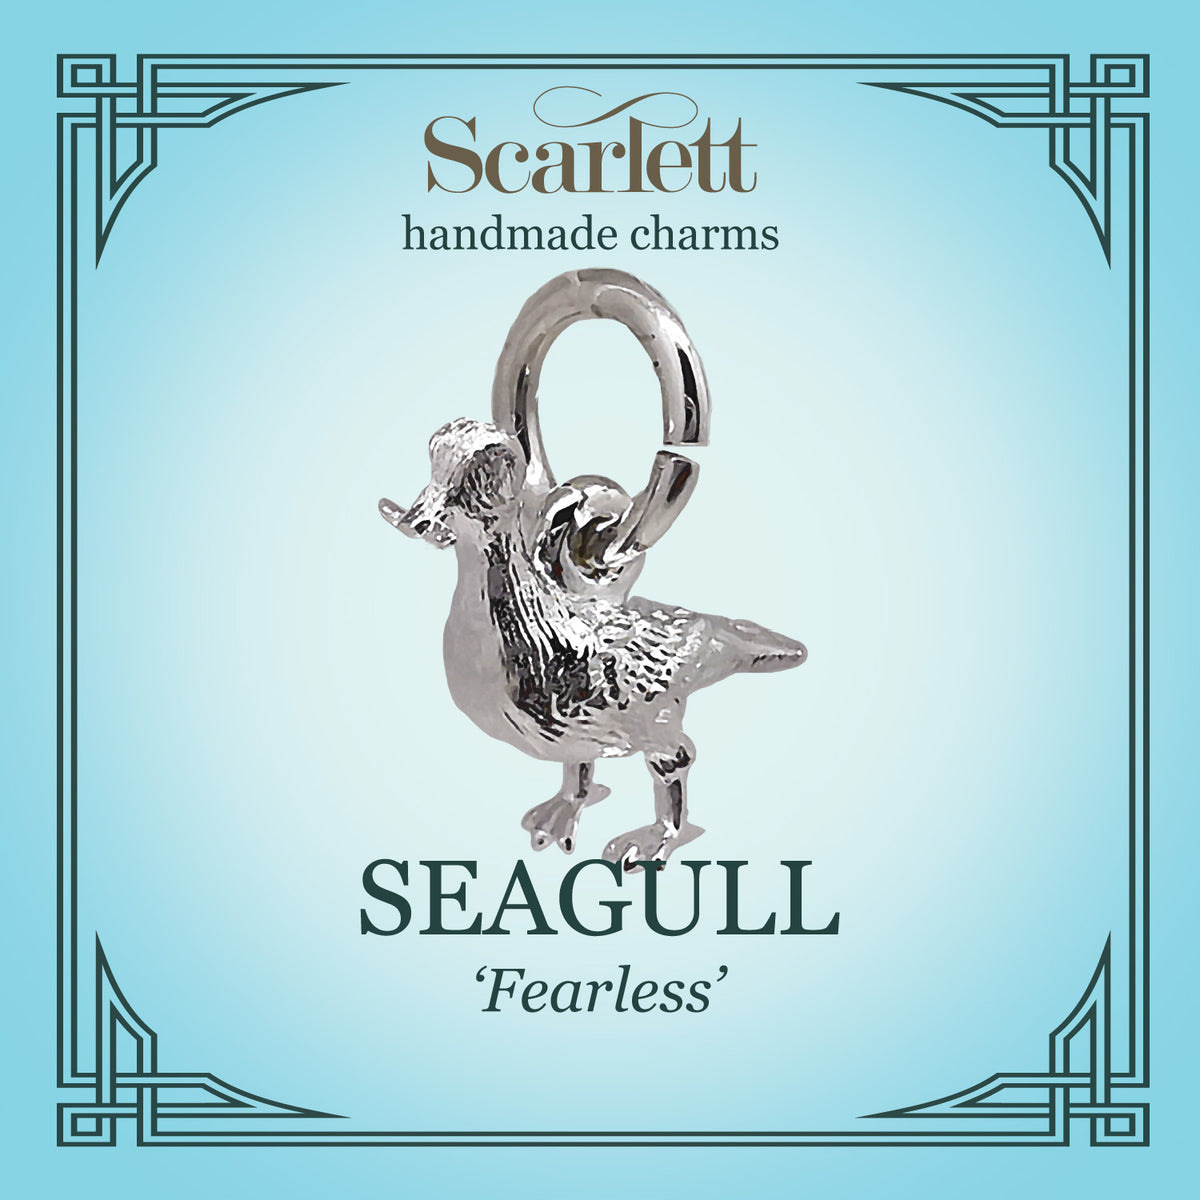 seagull brighton silver charm with stolen chip Scarlett Jewellery bracelet charmsslid gold seagull charm made in Brighton UK